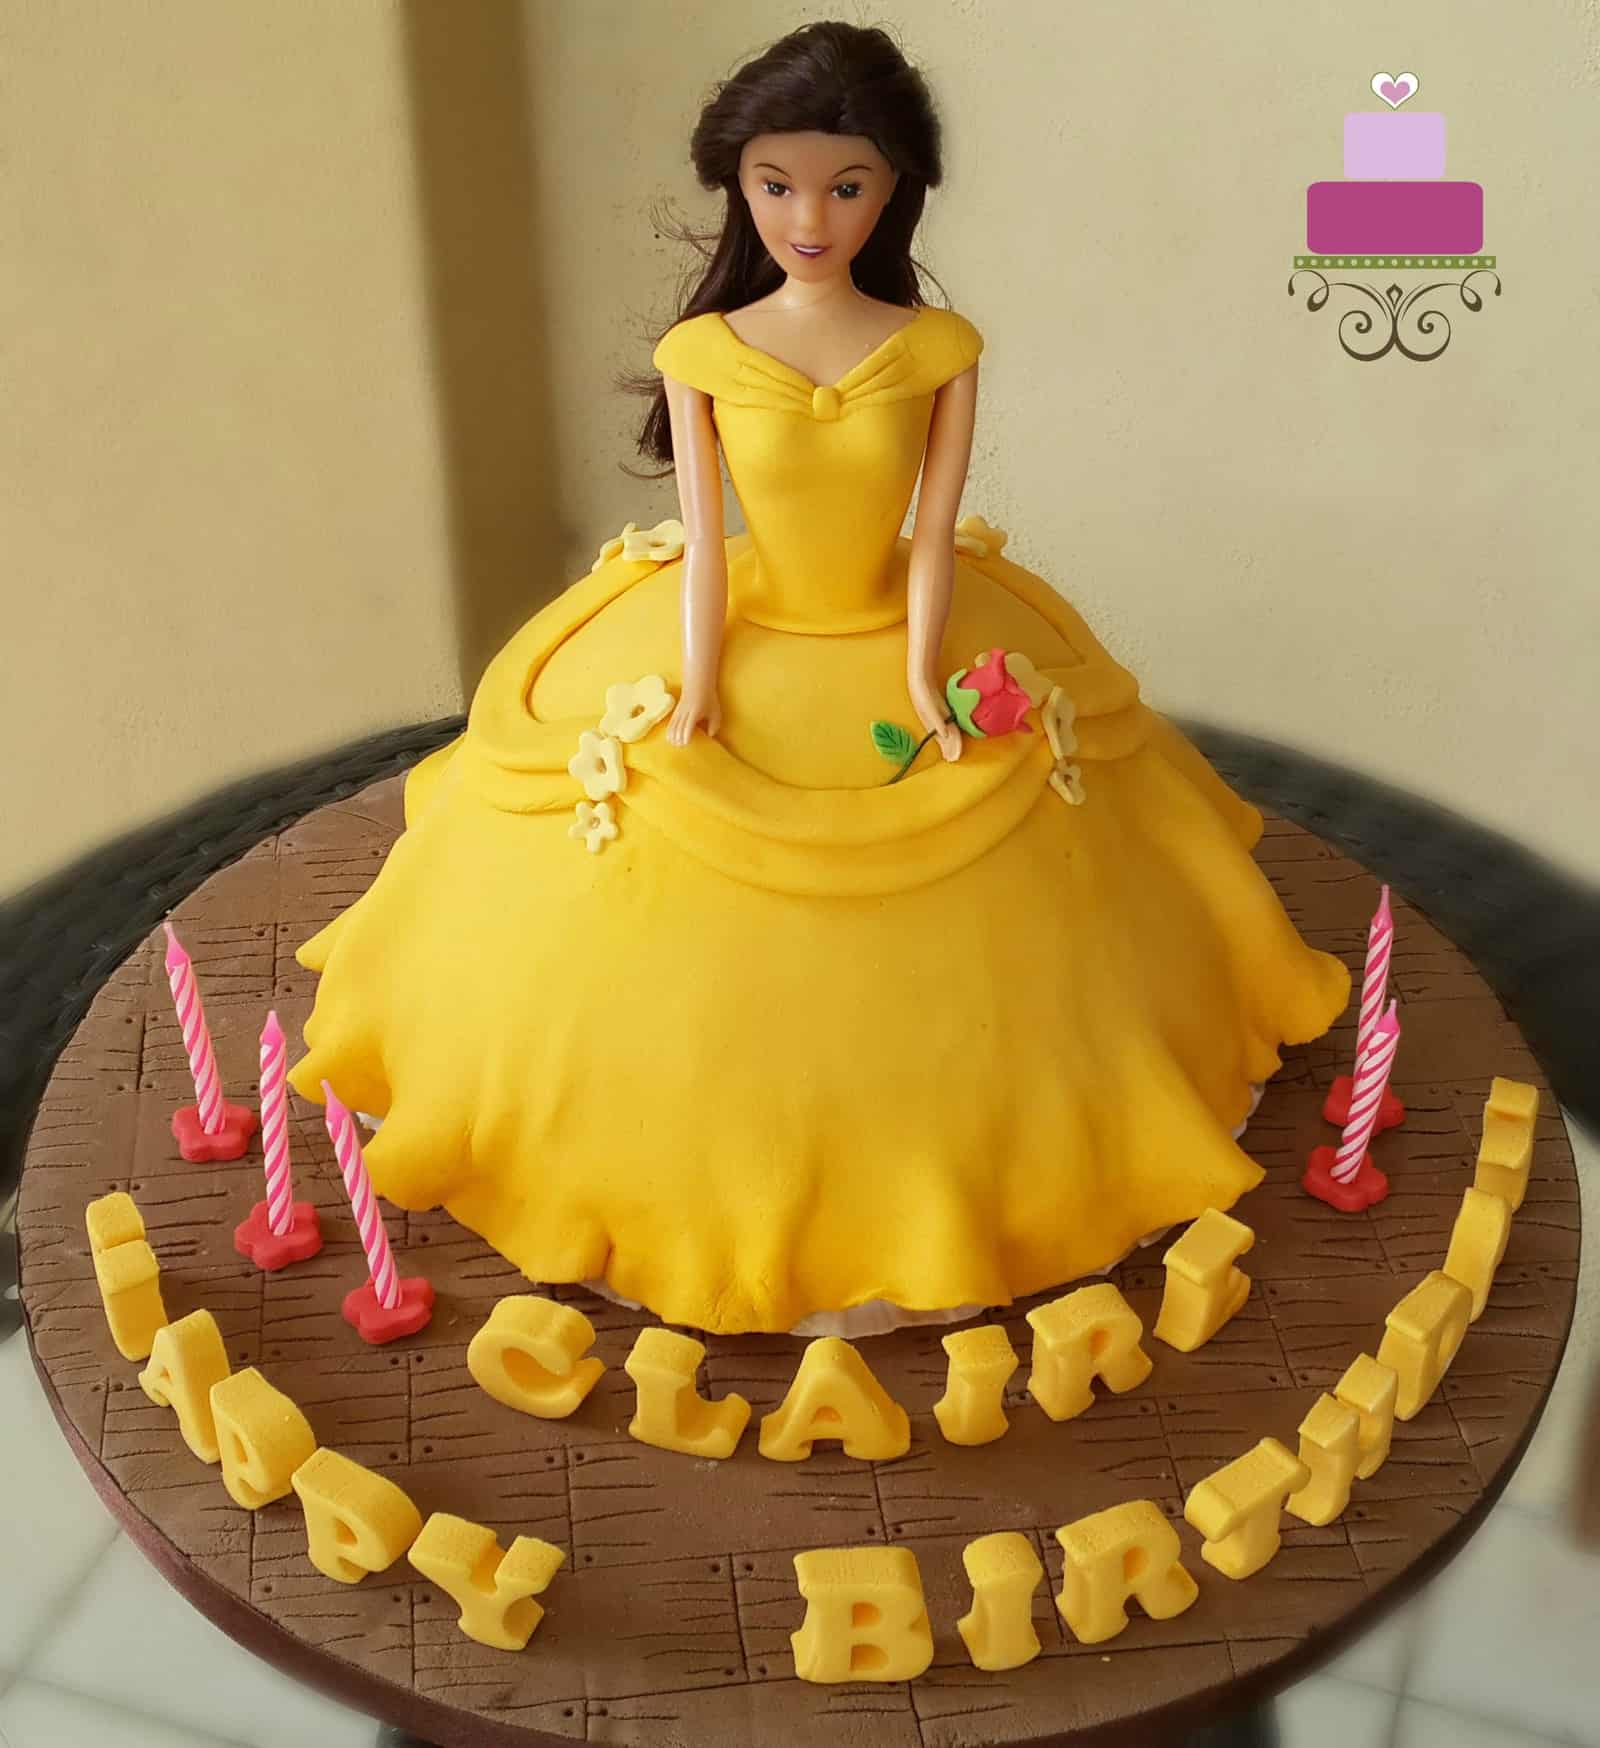 A doll cake decorated in yellow gown and a stalk of rose